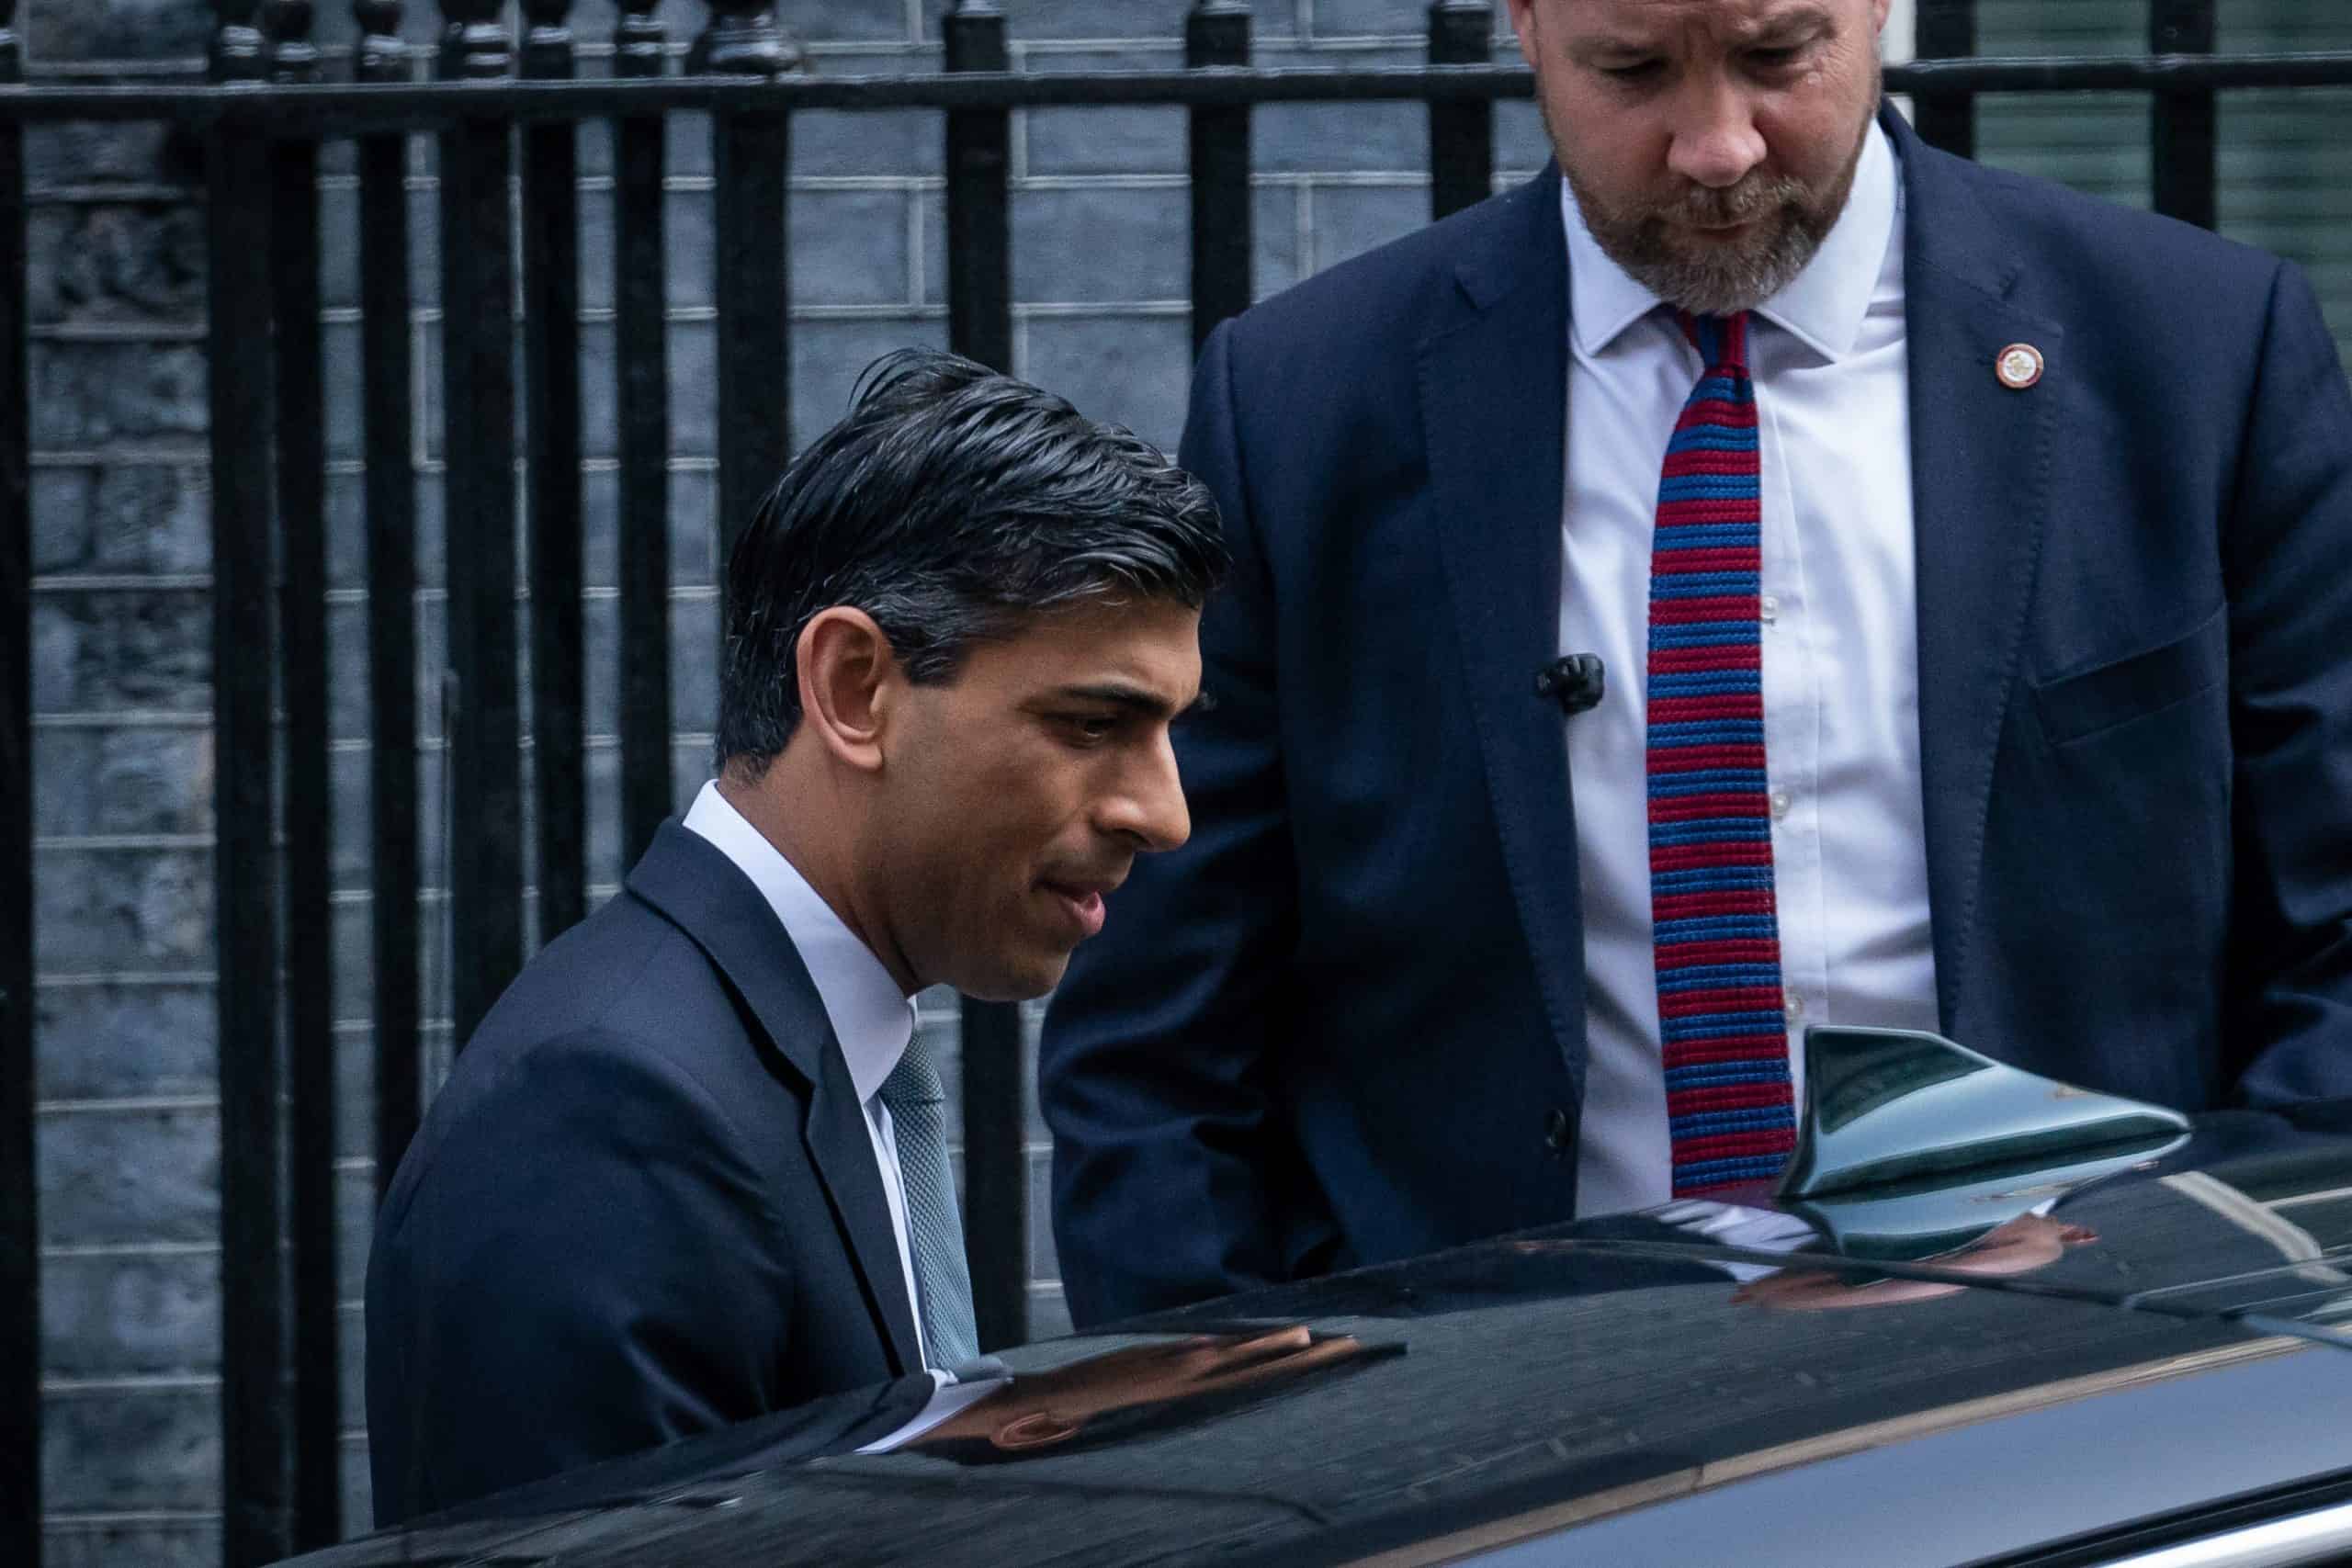 Sunak moves belongings out of Downing Street